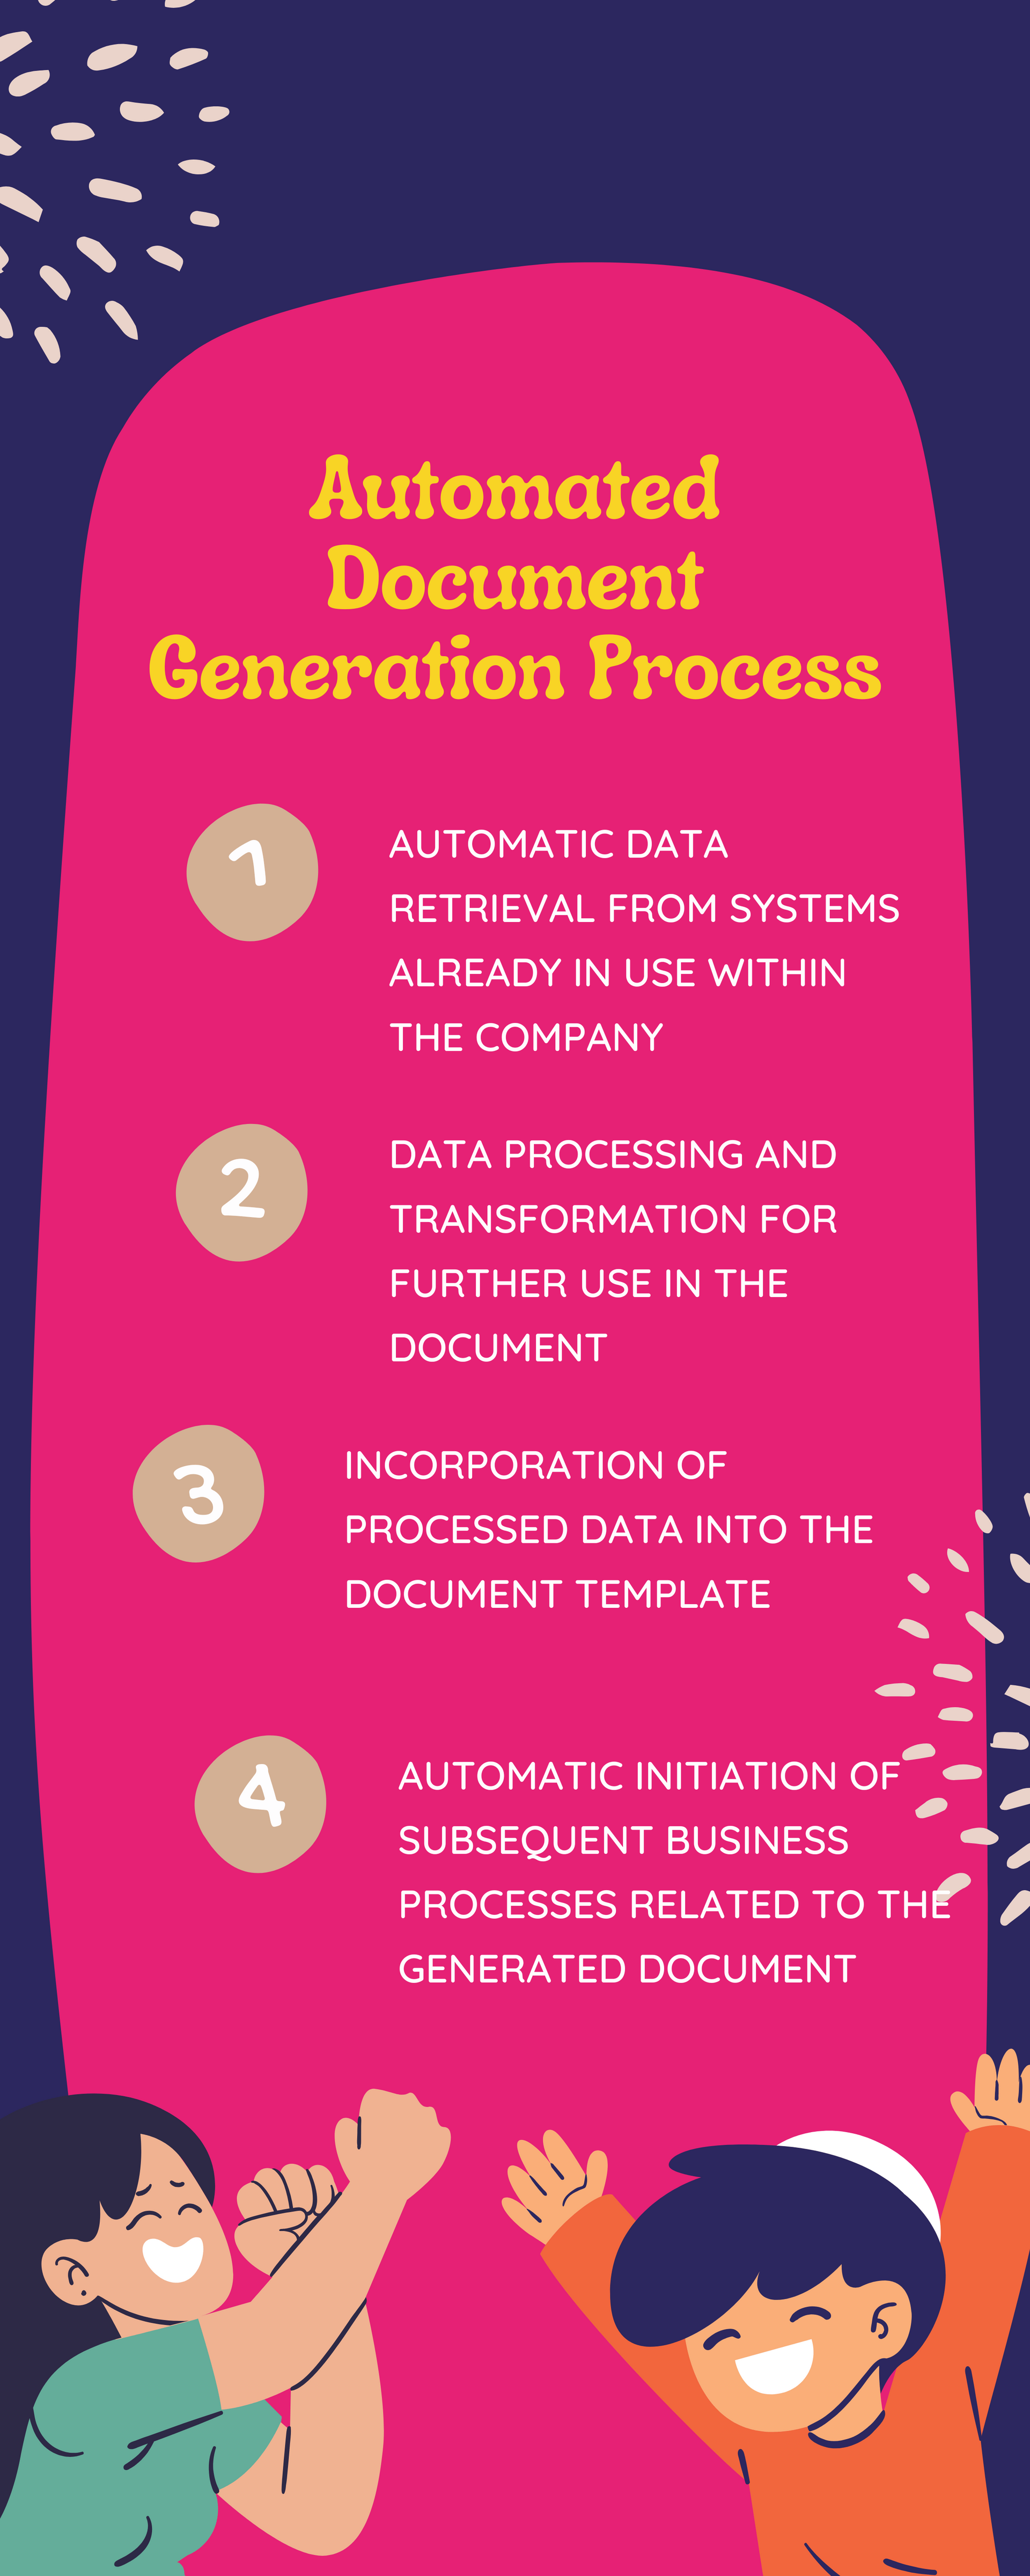 Automated Document Generation process